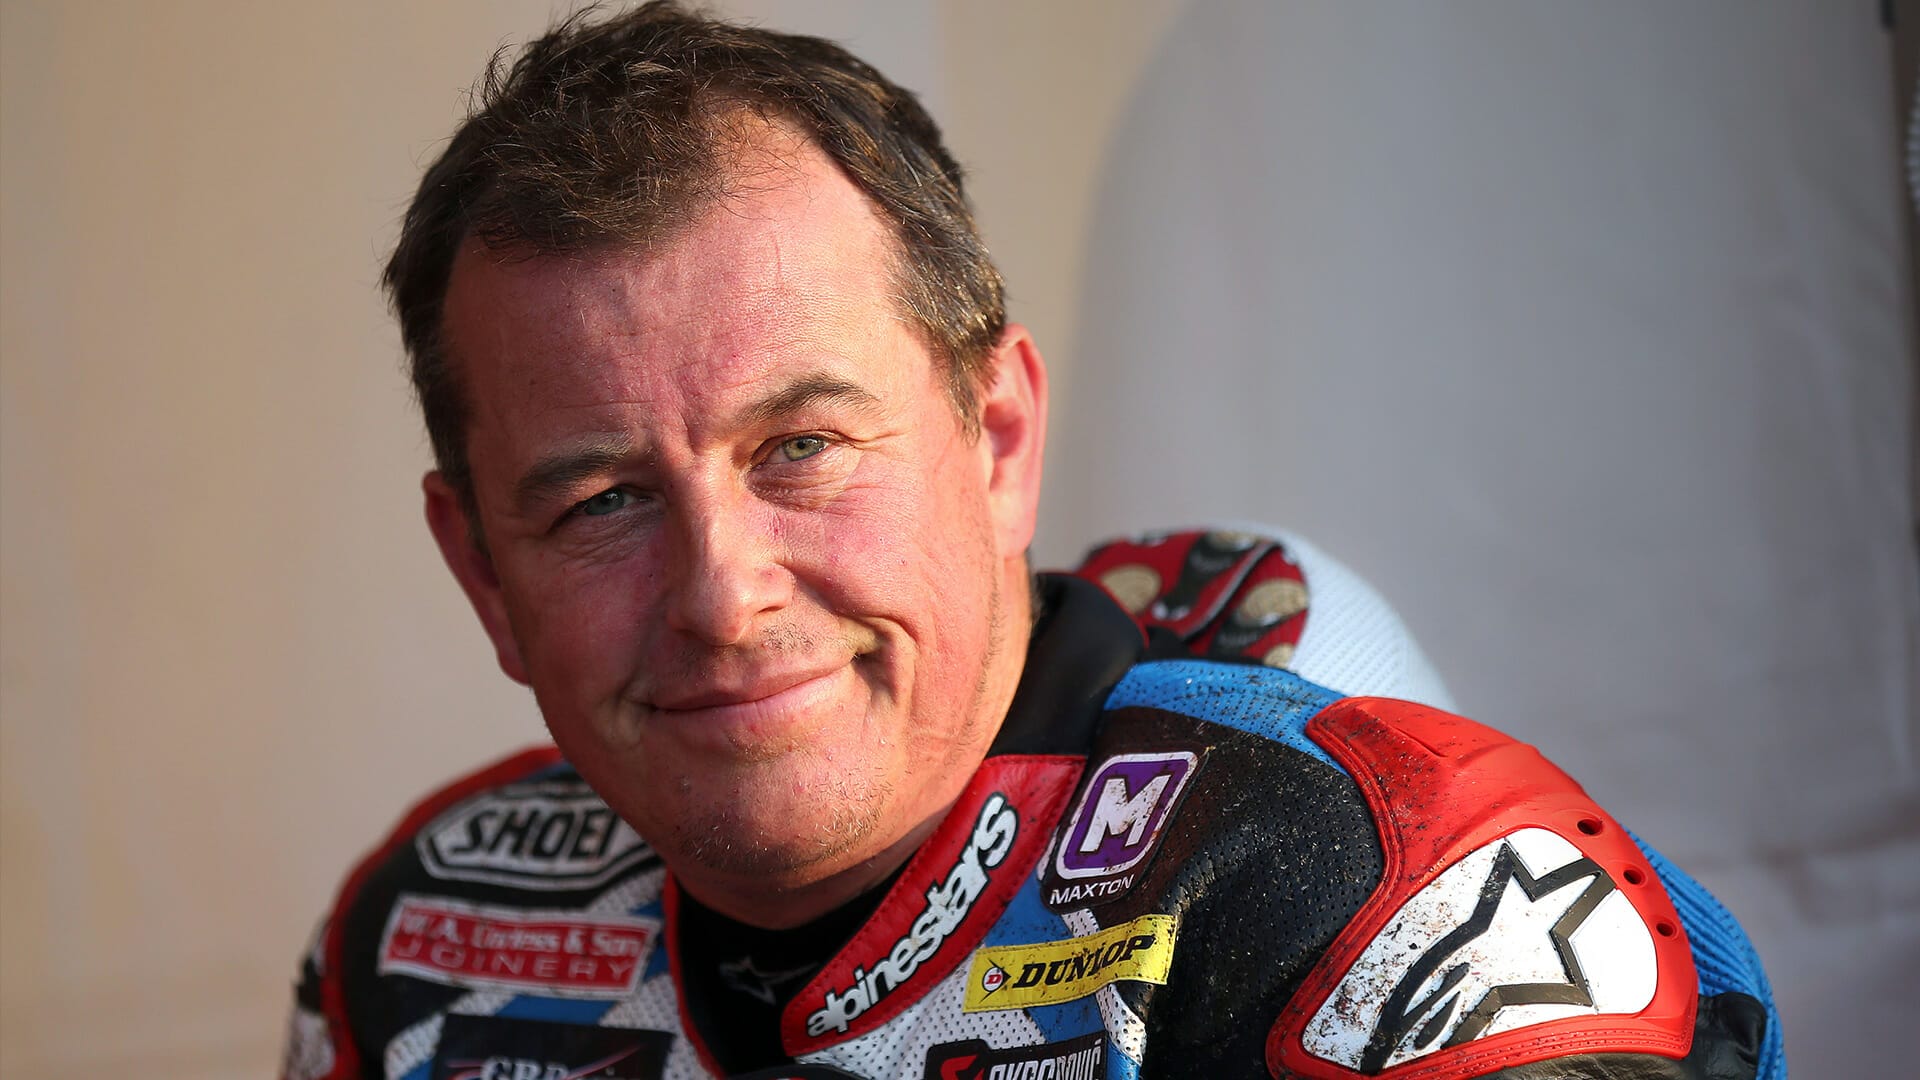 Cancellation of IOMTT may have far-reaching consequences for John McGuinness
- also in the MOTORCYCLES.NEWS APP